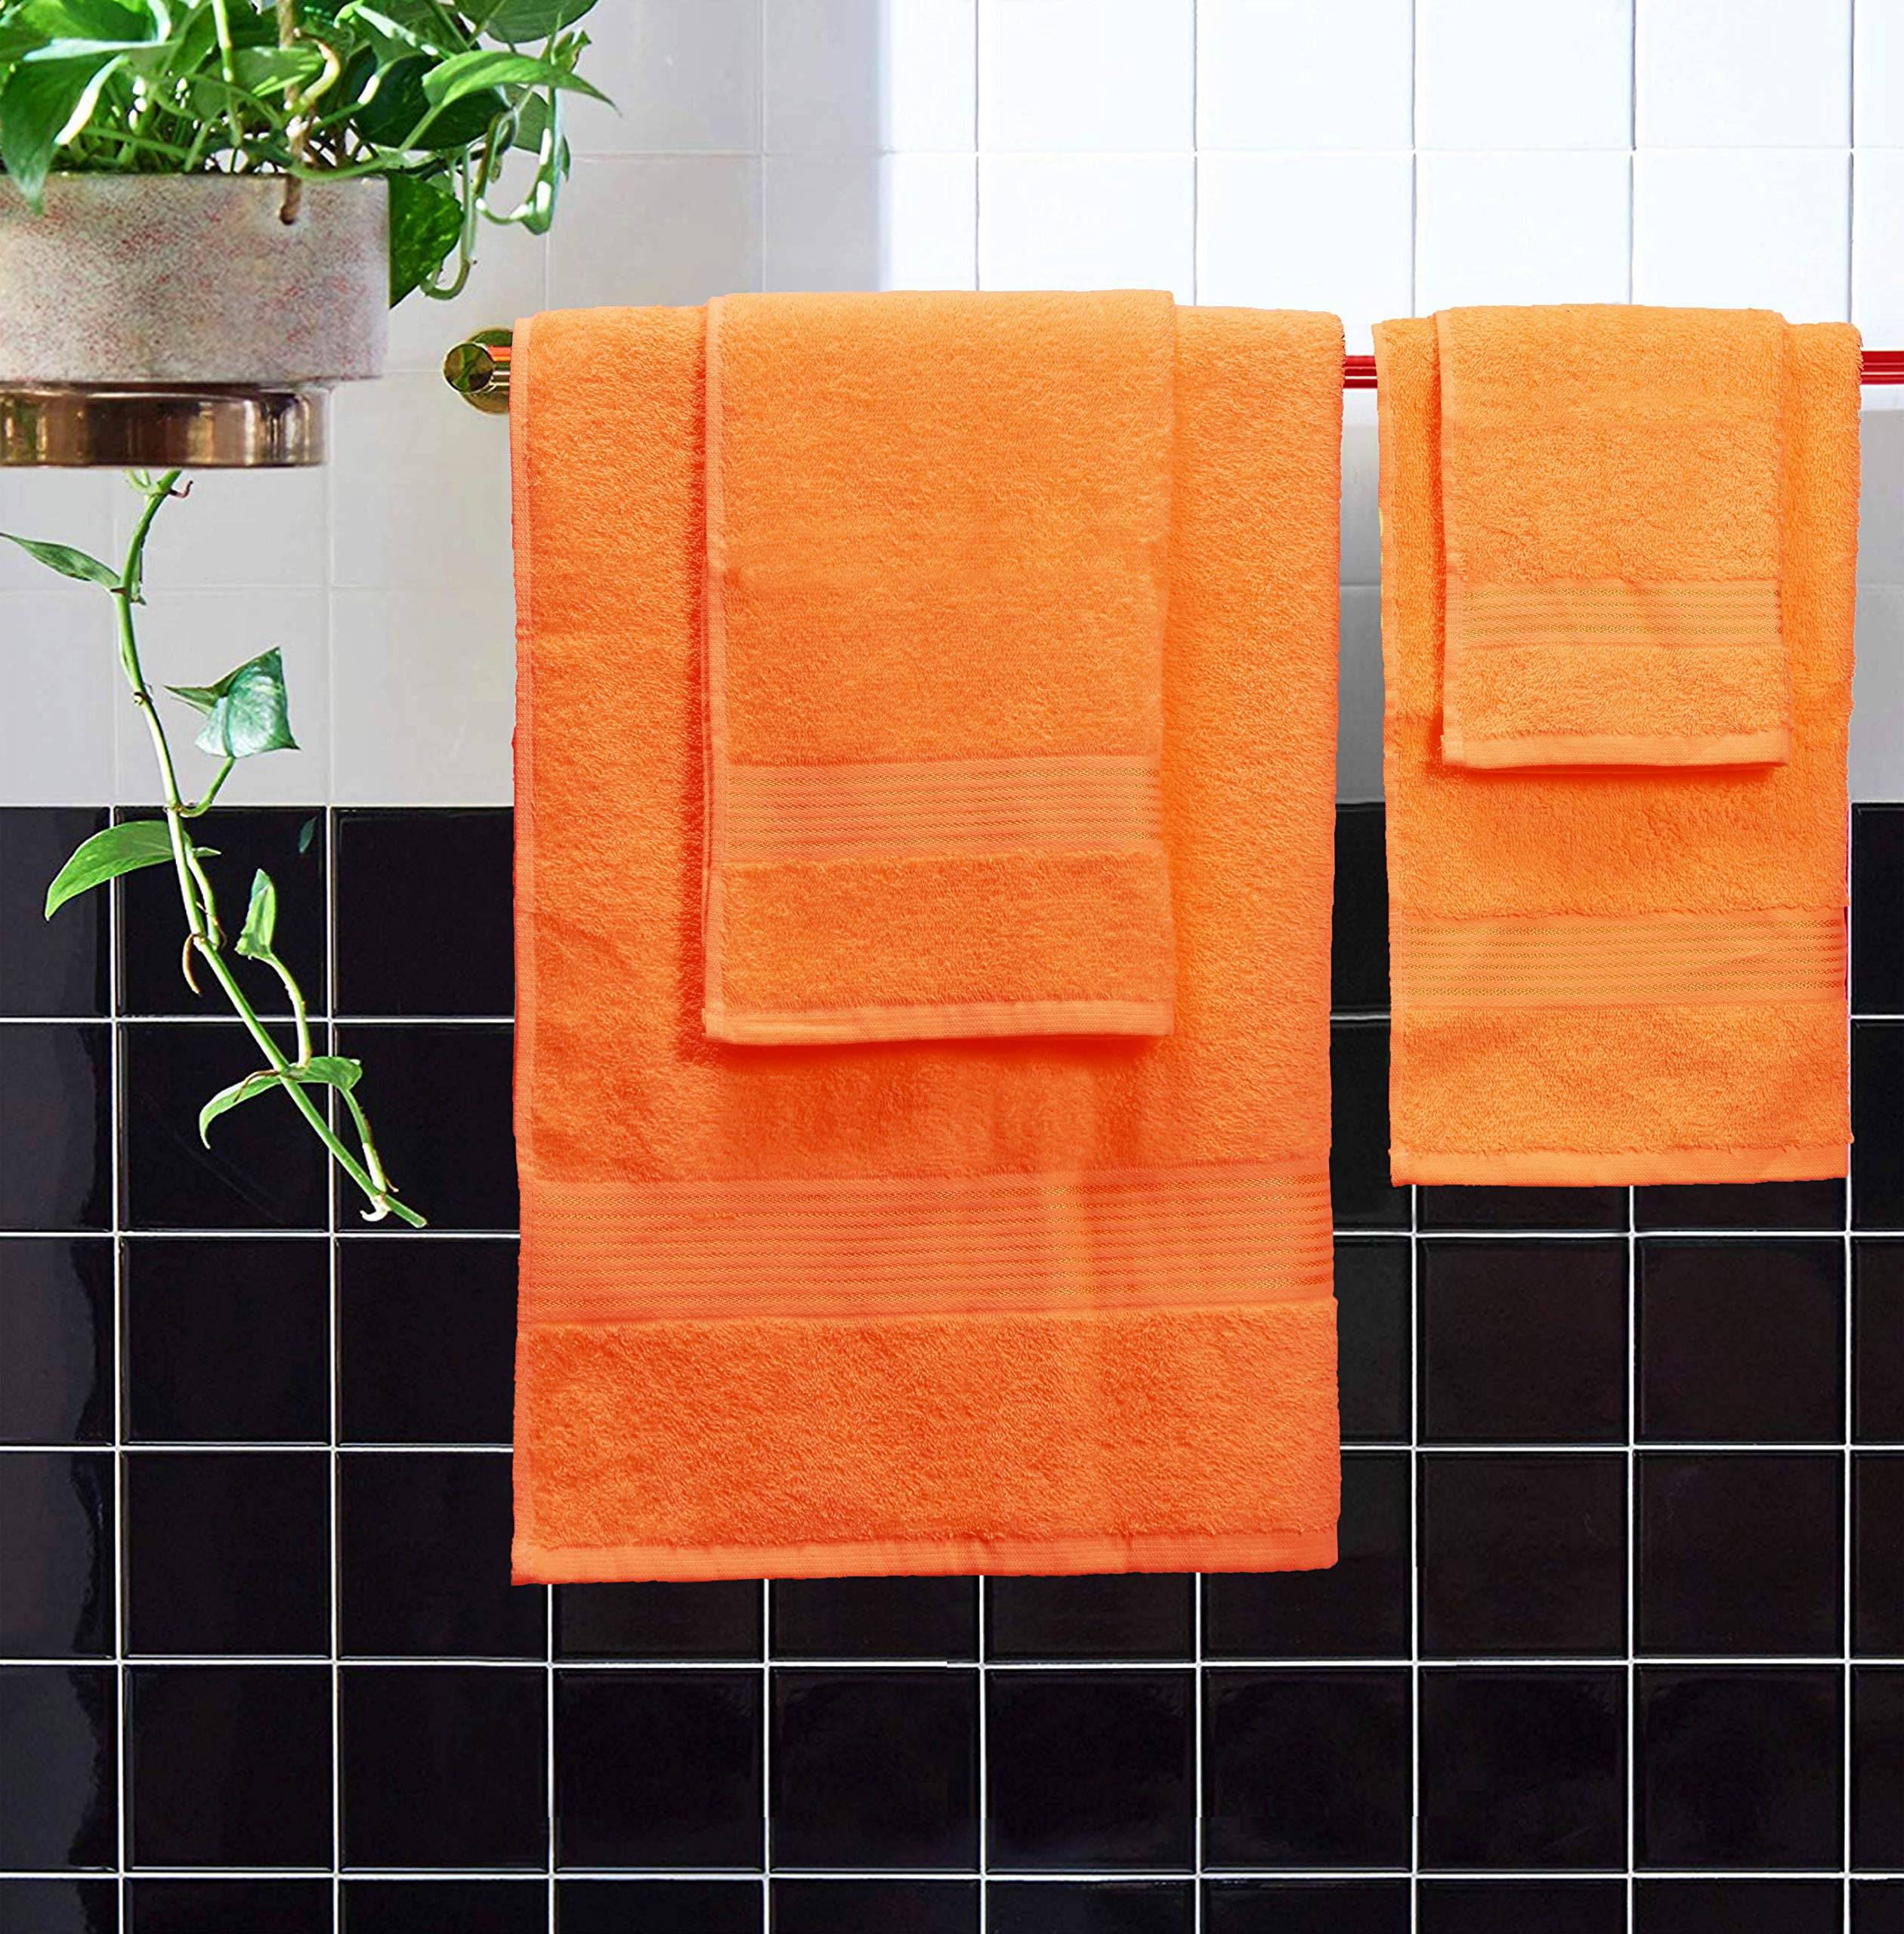 Belizzi Home Ultra Soft 6 Pack Cotton Towel Set, Contains 2 Bath Towels 28x55 inch, 2 Hand Towels 16x24 inch & 2 Wash Coths 12x12 inch, Ideal for